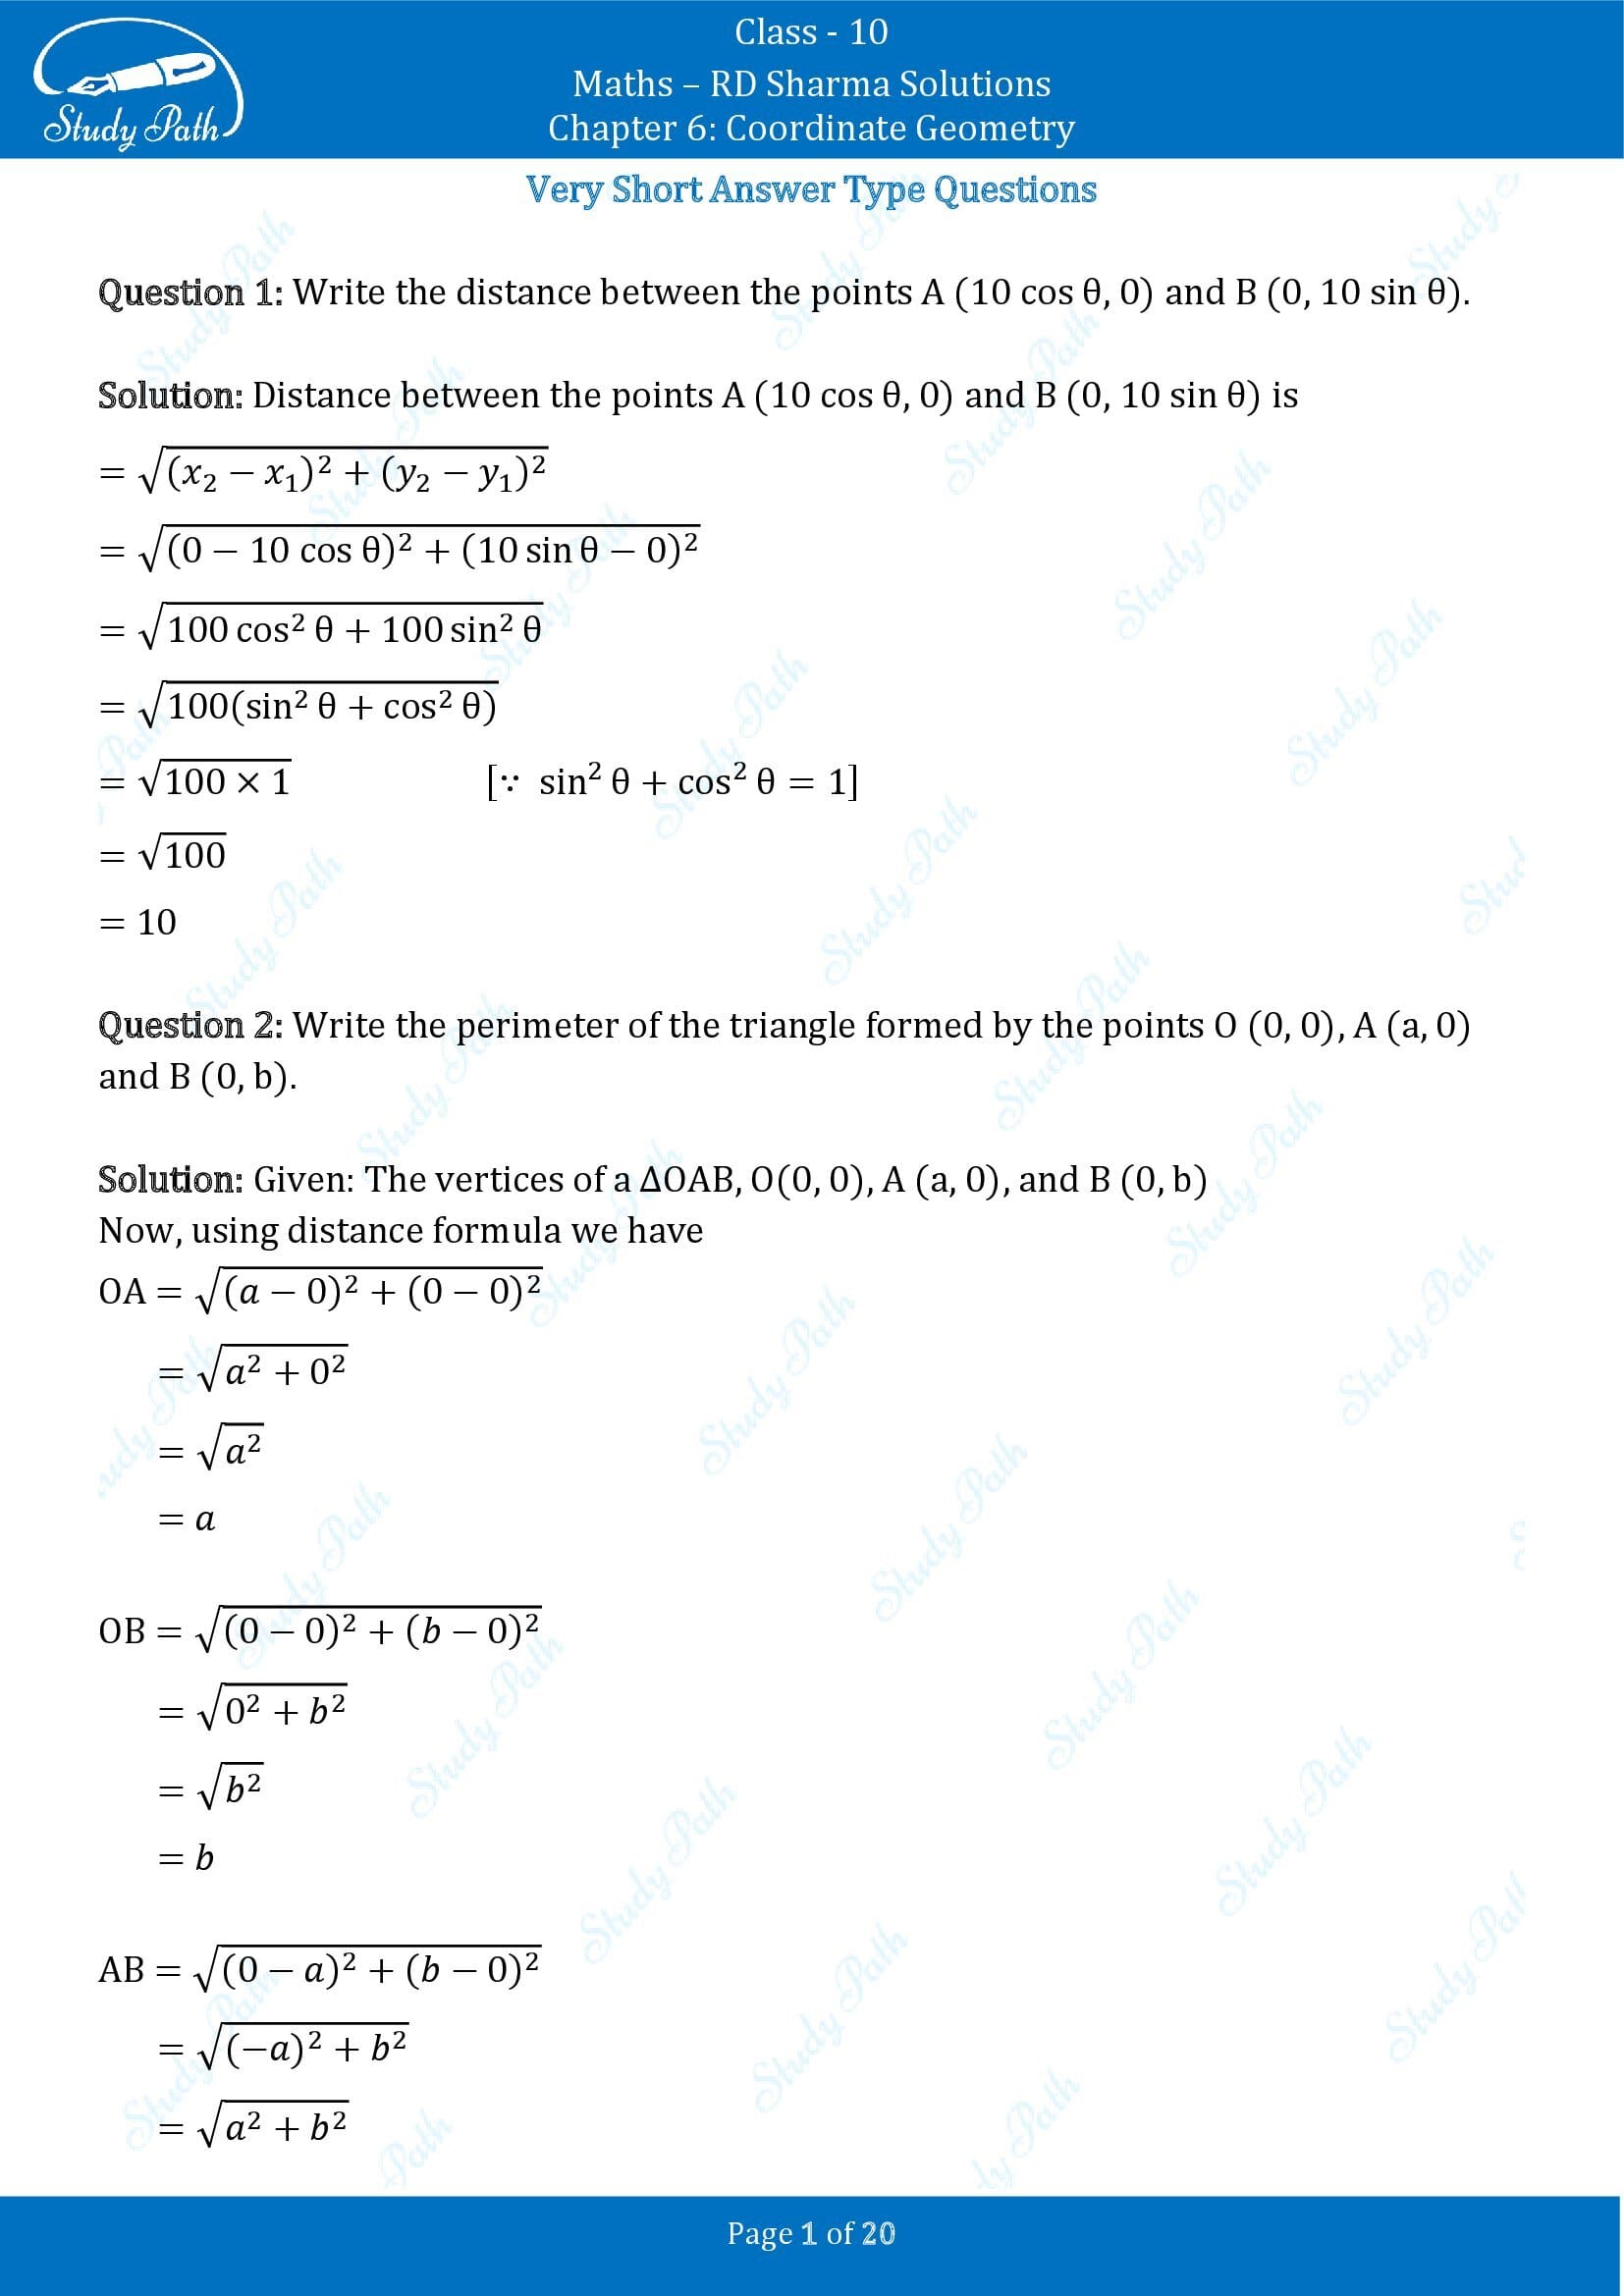 RD Sharma Solutions Class 10 Chapter 6 Coordinate Geometry Very Short Answer Type Questions VSAQs 00001